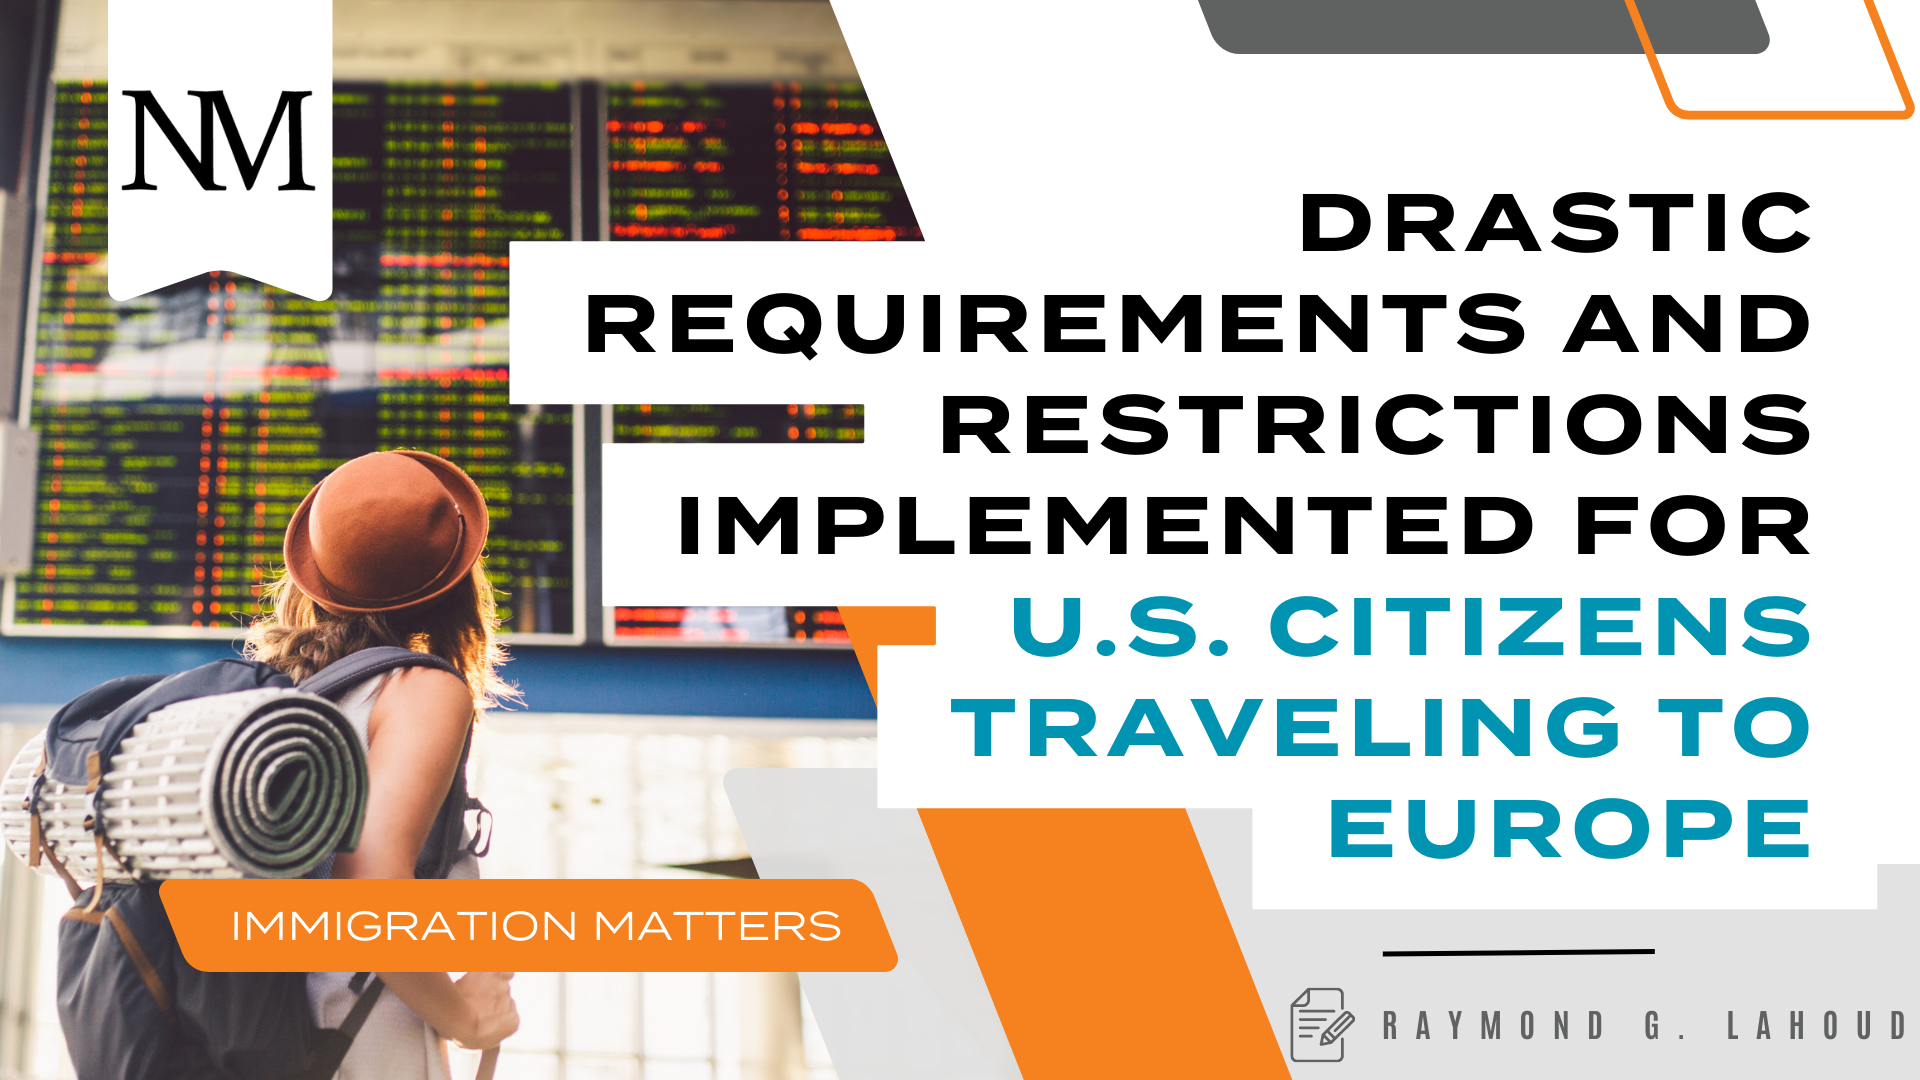 Drastic Requirements and Restrictions Implemented for U.S. Citizens Traveling to Europe